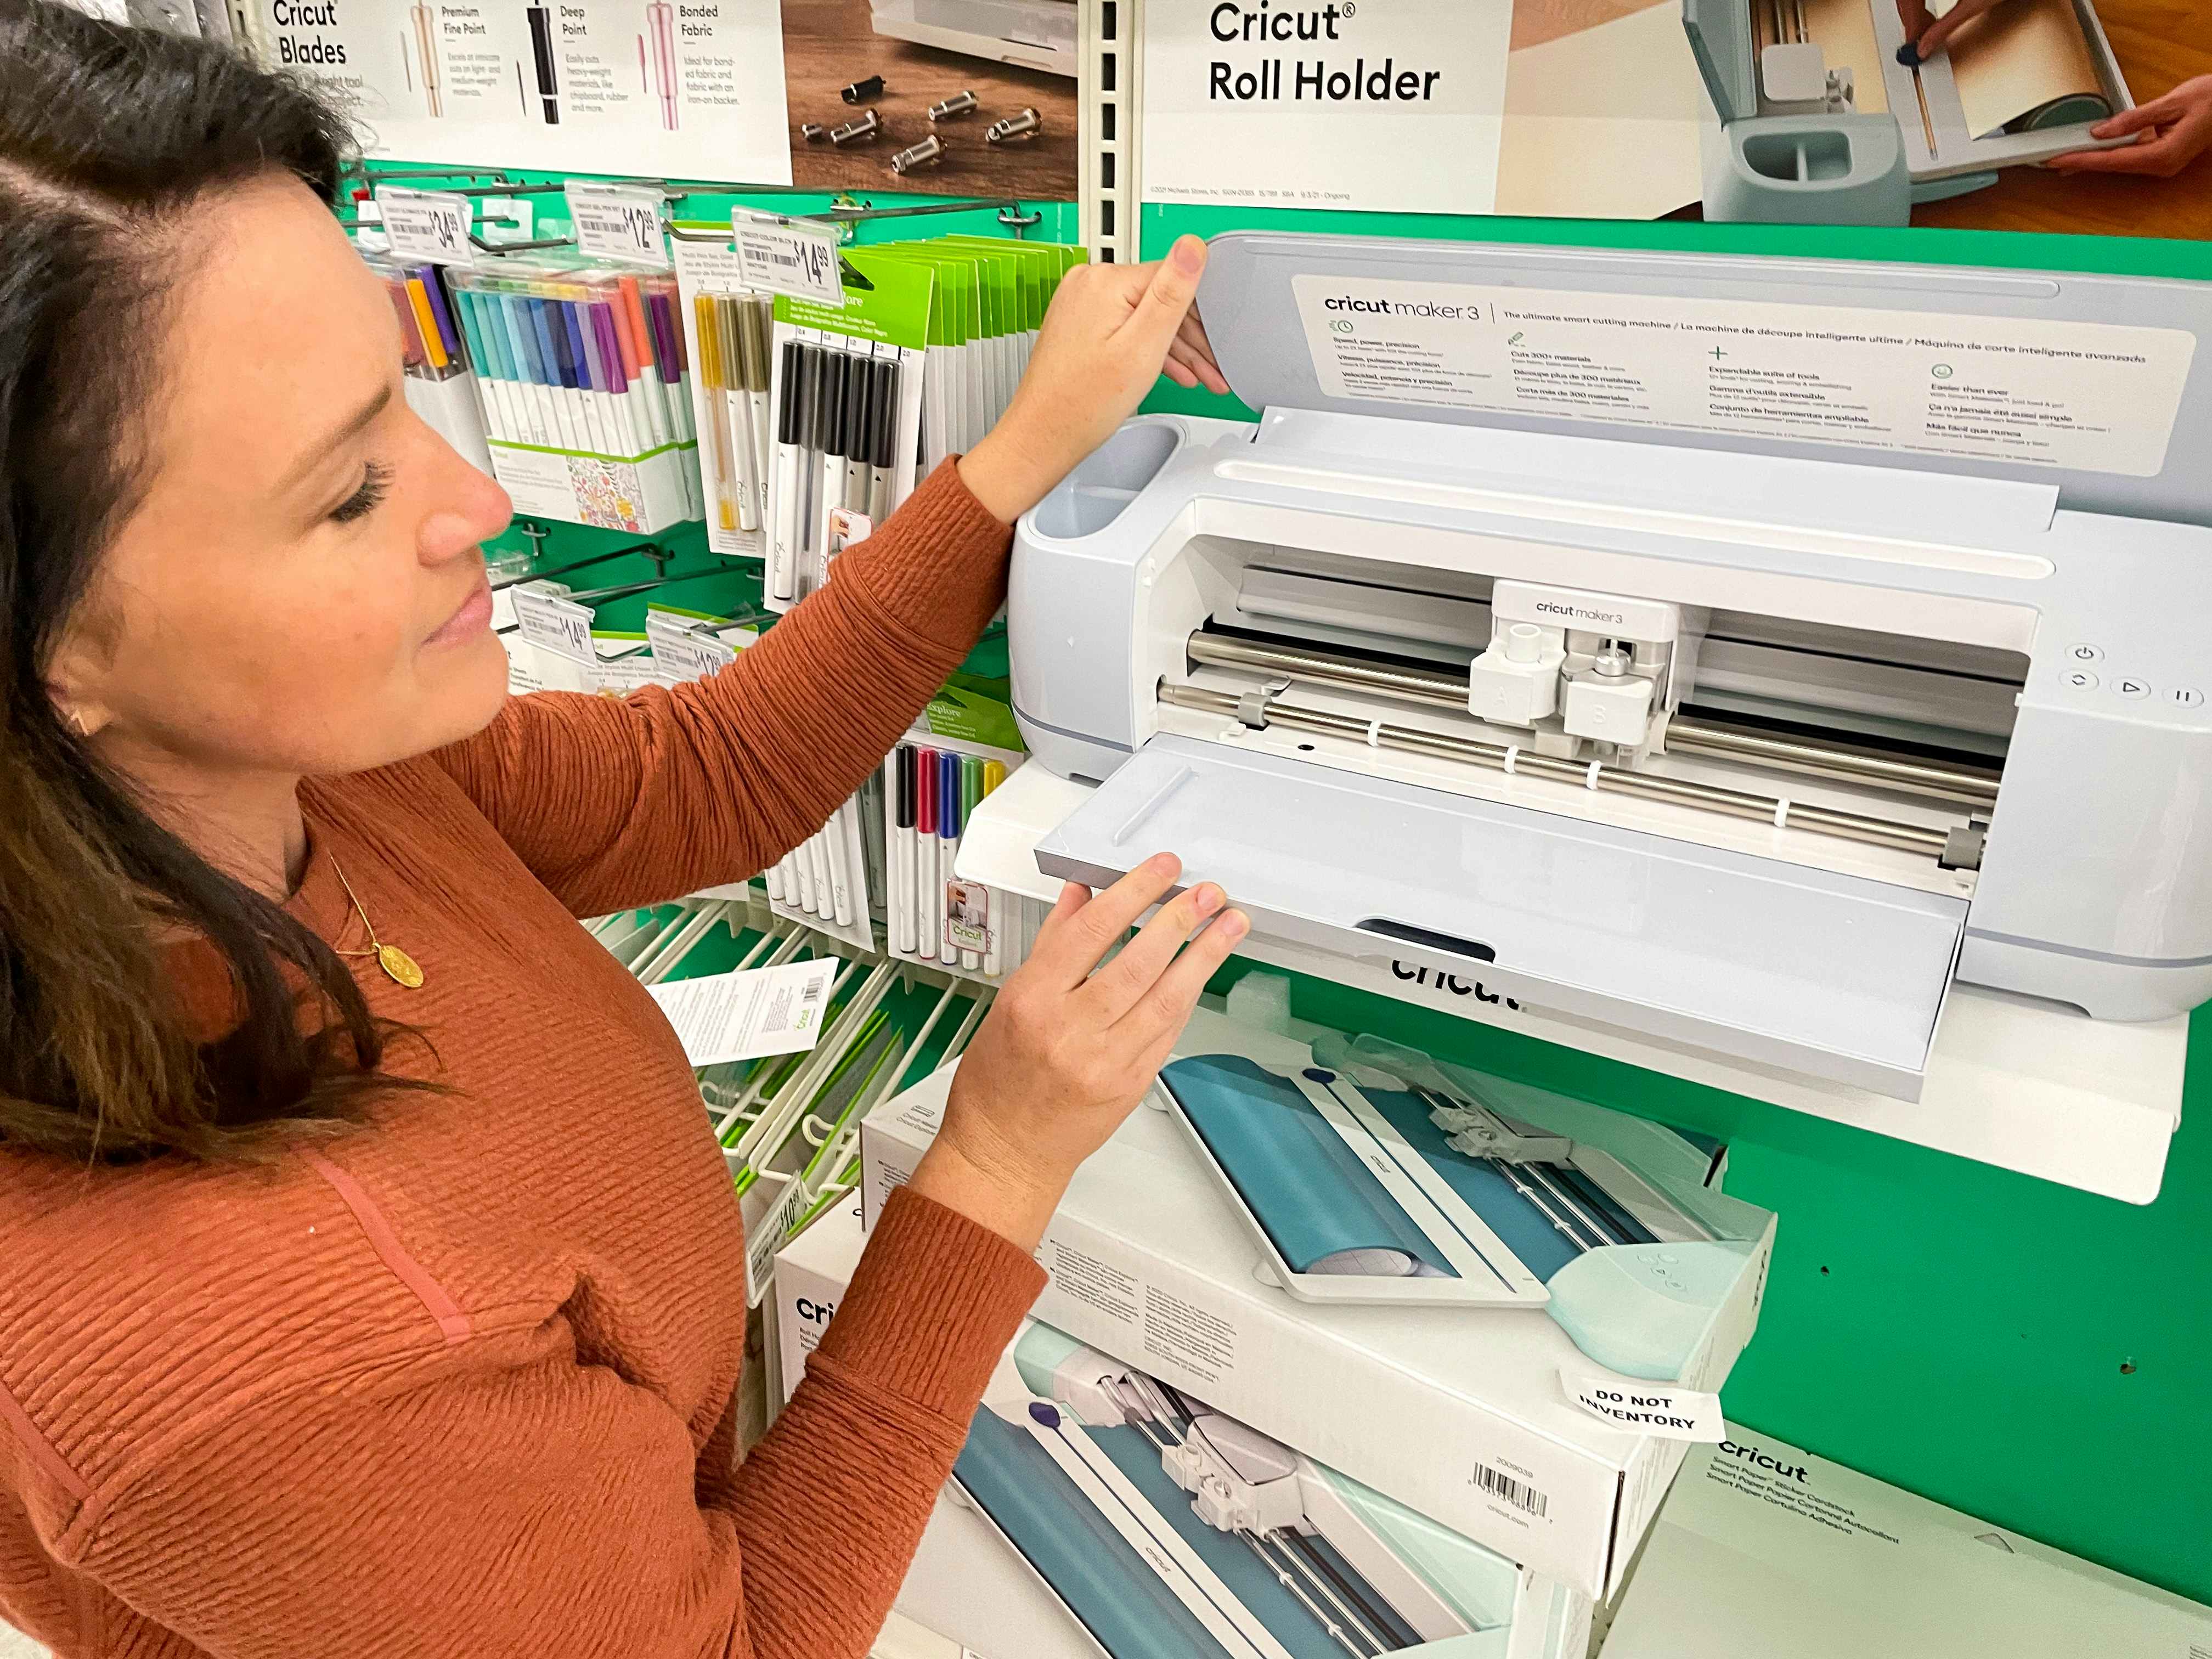 A person looking at the Cricut Maker 3 on display inside a craft store